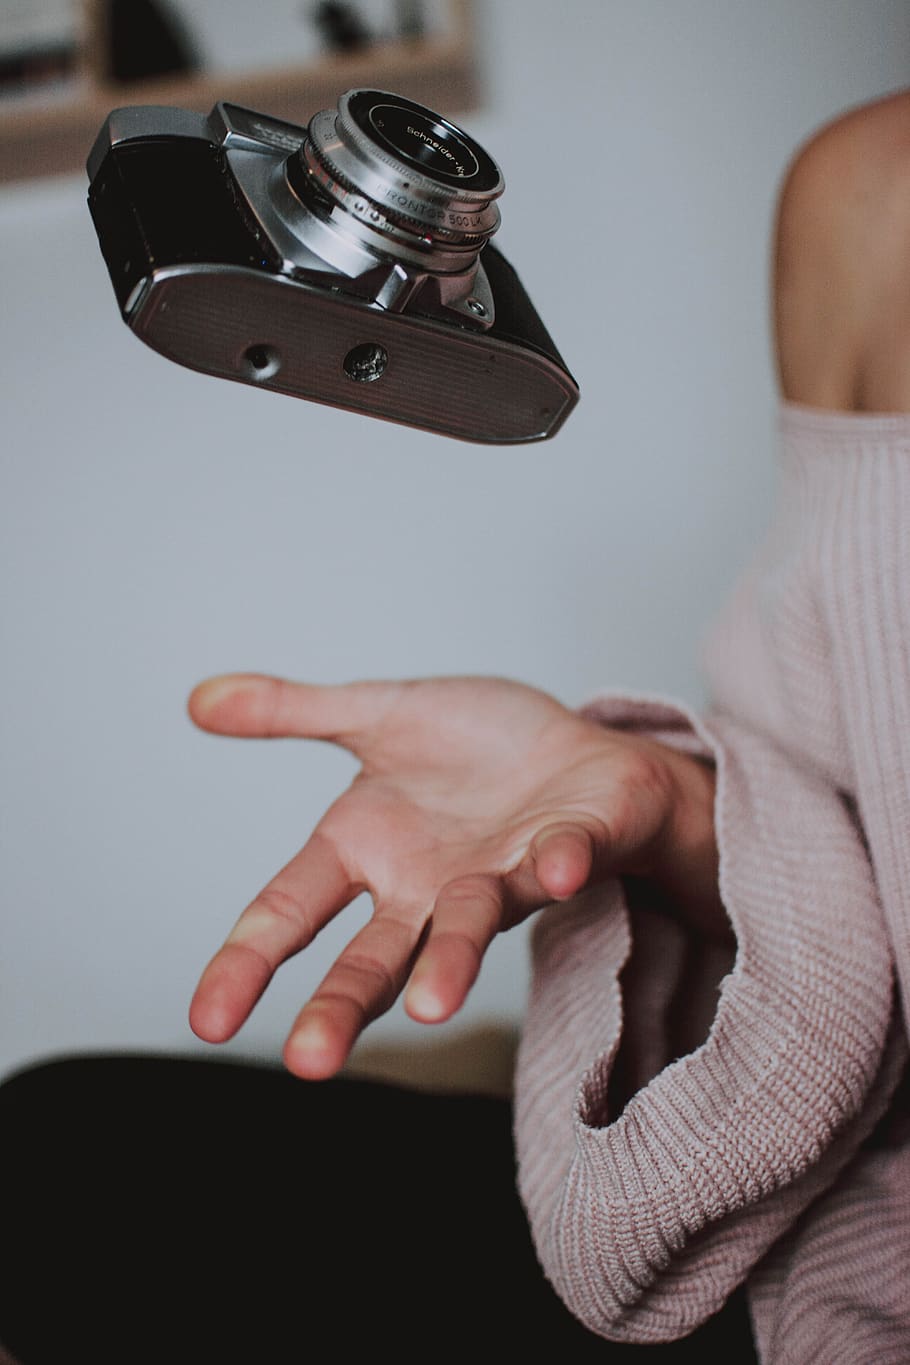 camera, levitation, flying, hand, throw, float, human hand, indoors, human body part, real people